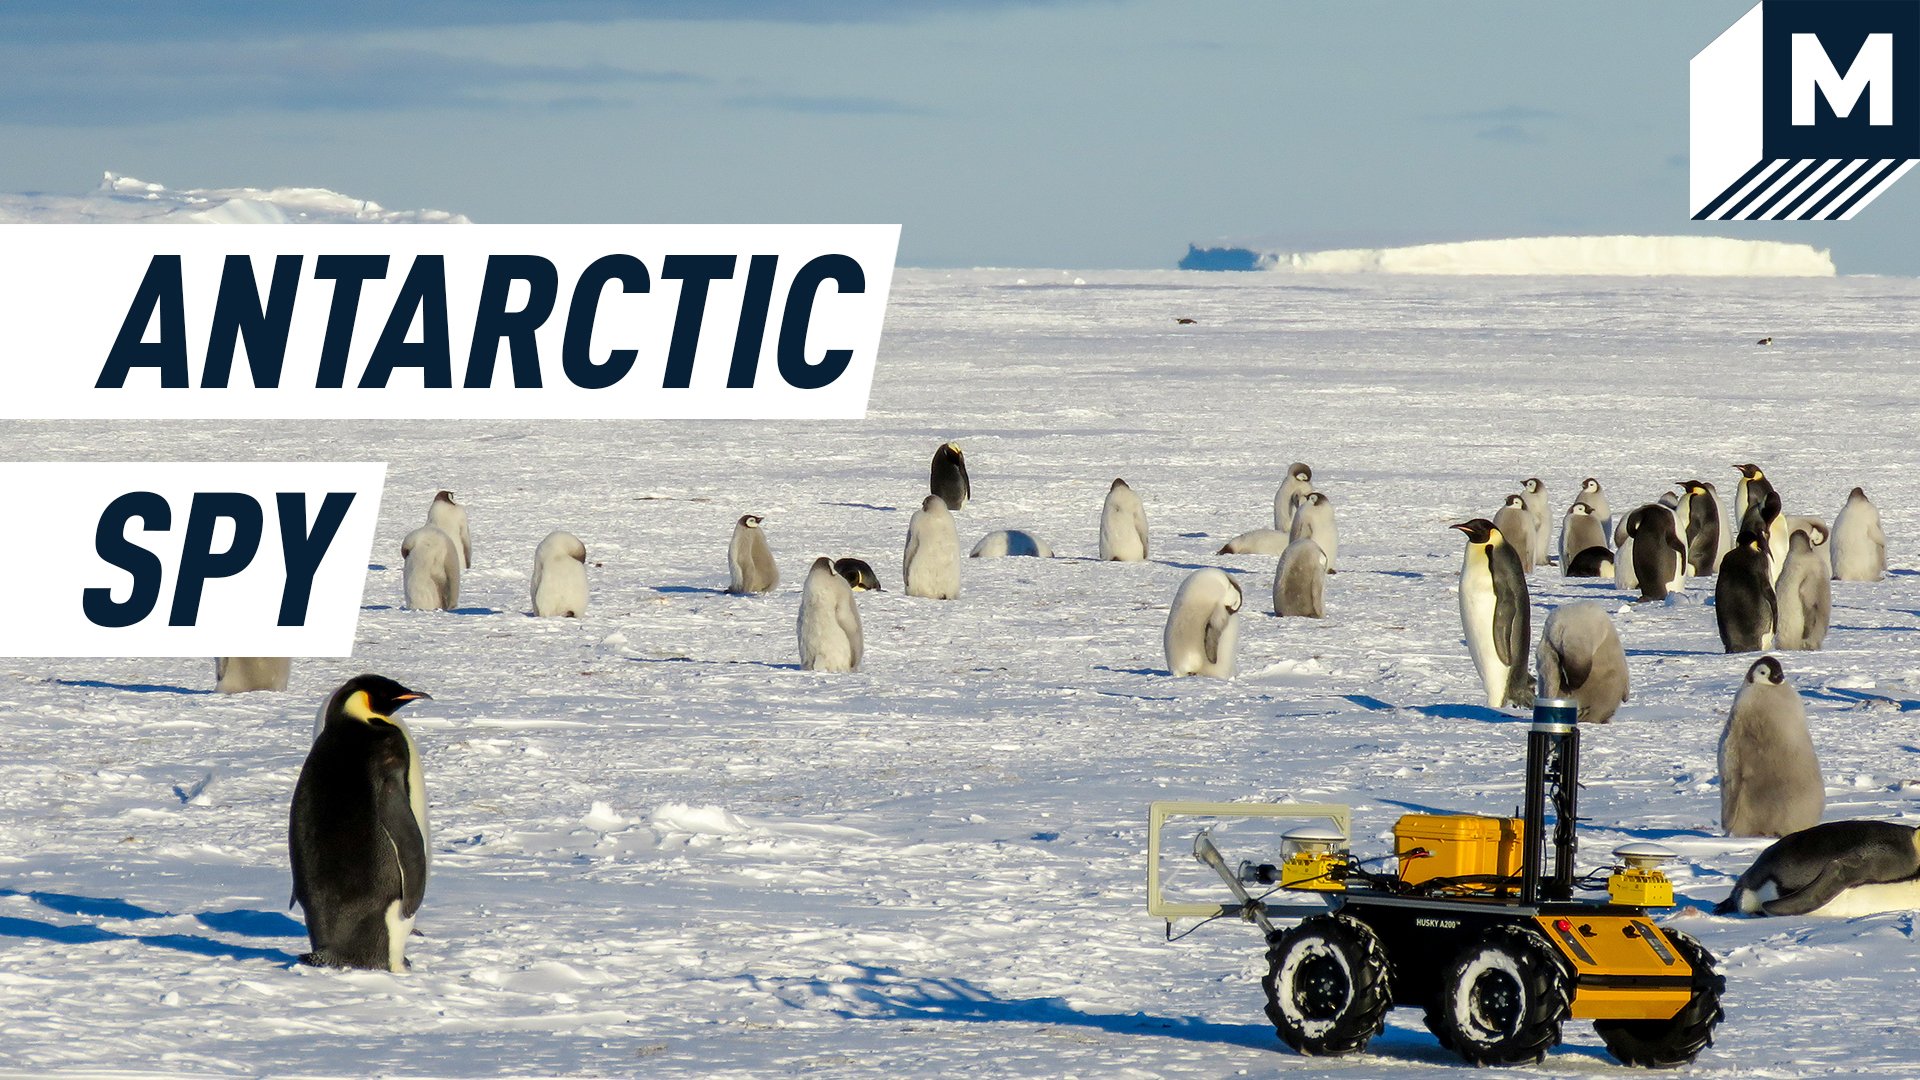 CAPTION: ANTARCTIC SPY. A penguin (on the left) is looking at a small yellow robot (on the right). The penguin's colony is visible at the background. Behind them a clear blue sky meets the Antarctic landscape.